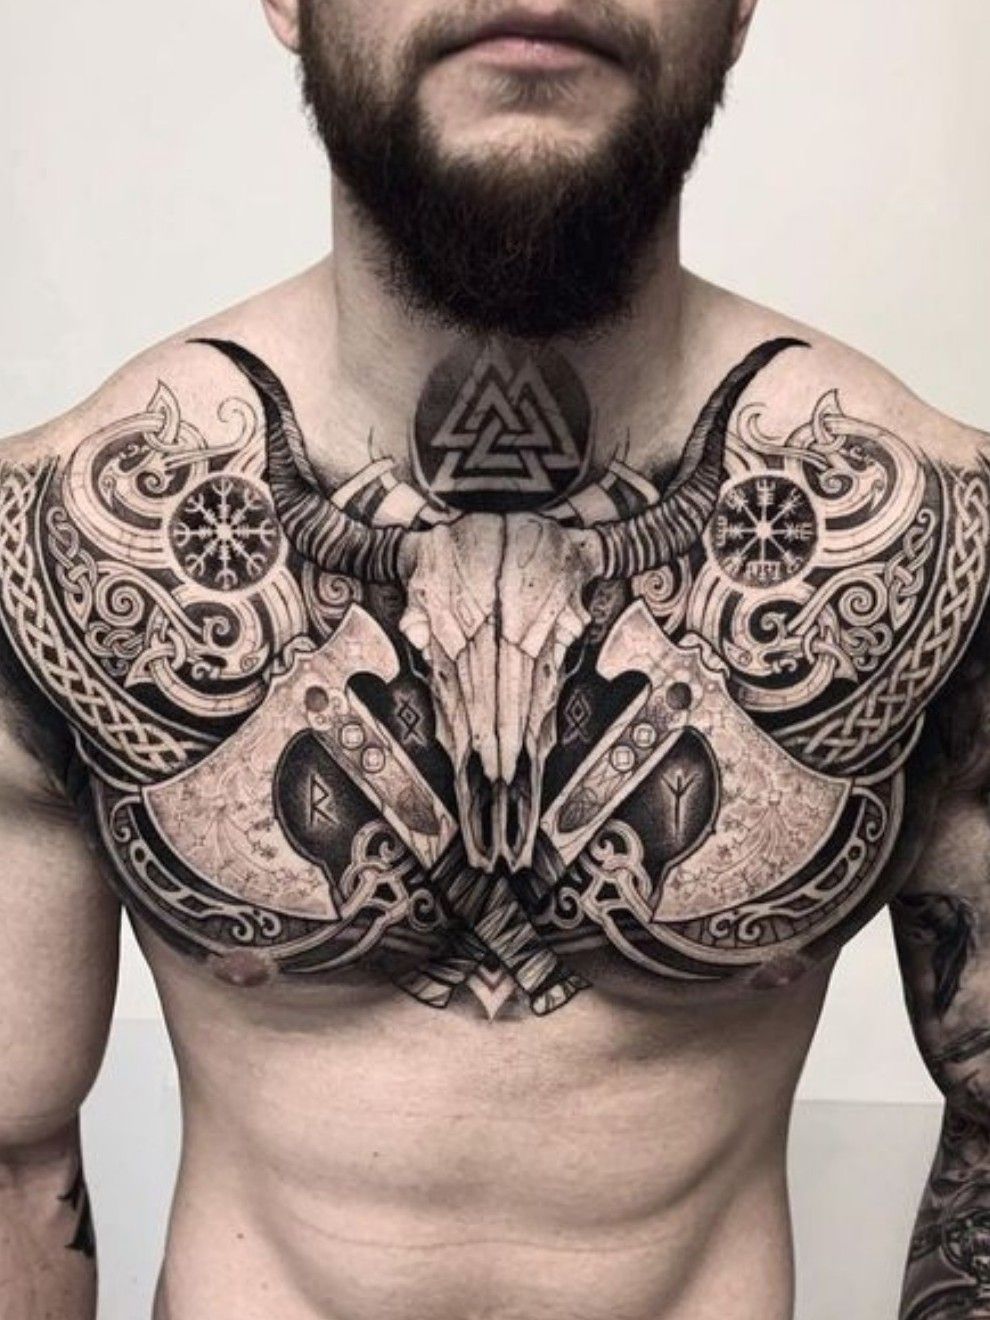 Eye catching symmetrical tattoo ideas and design tips